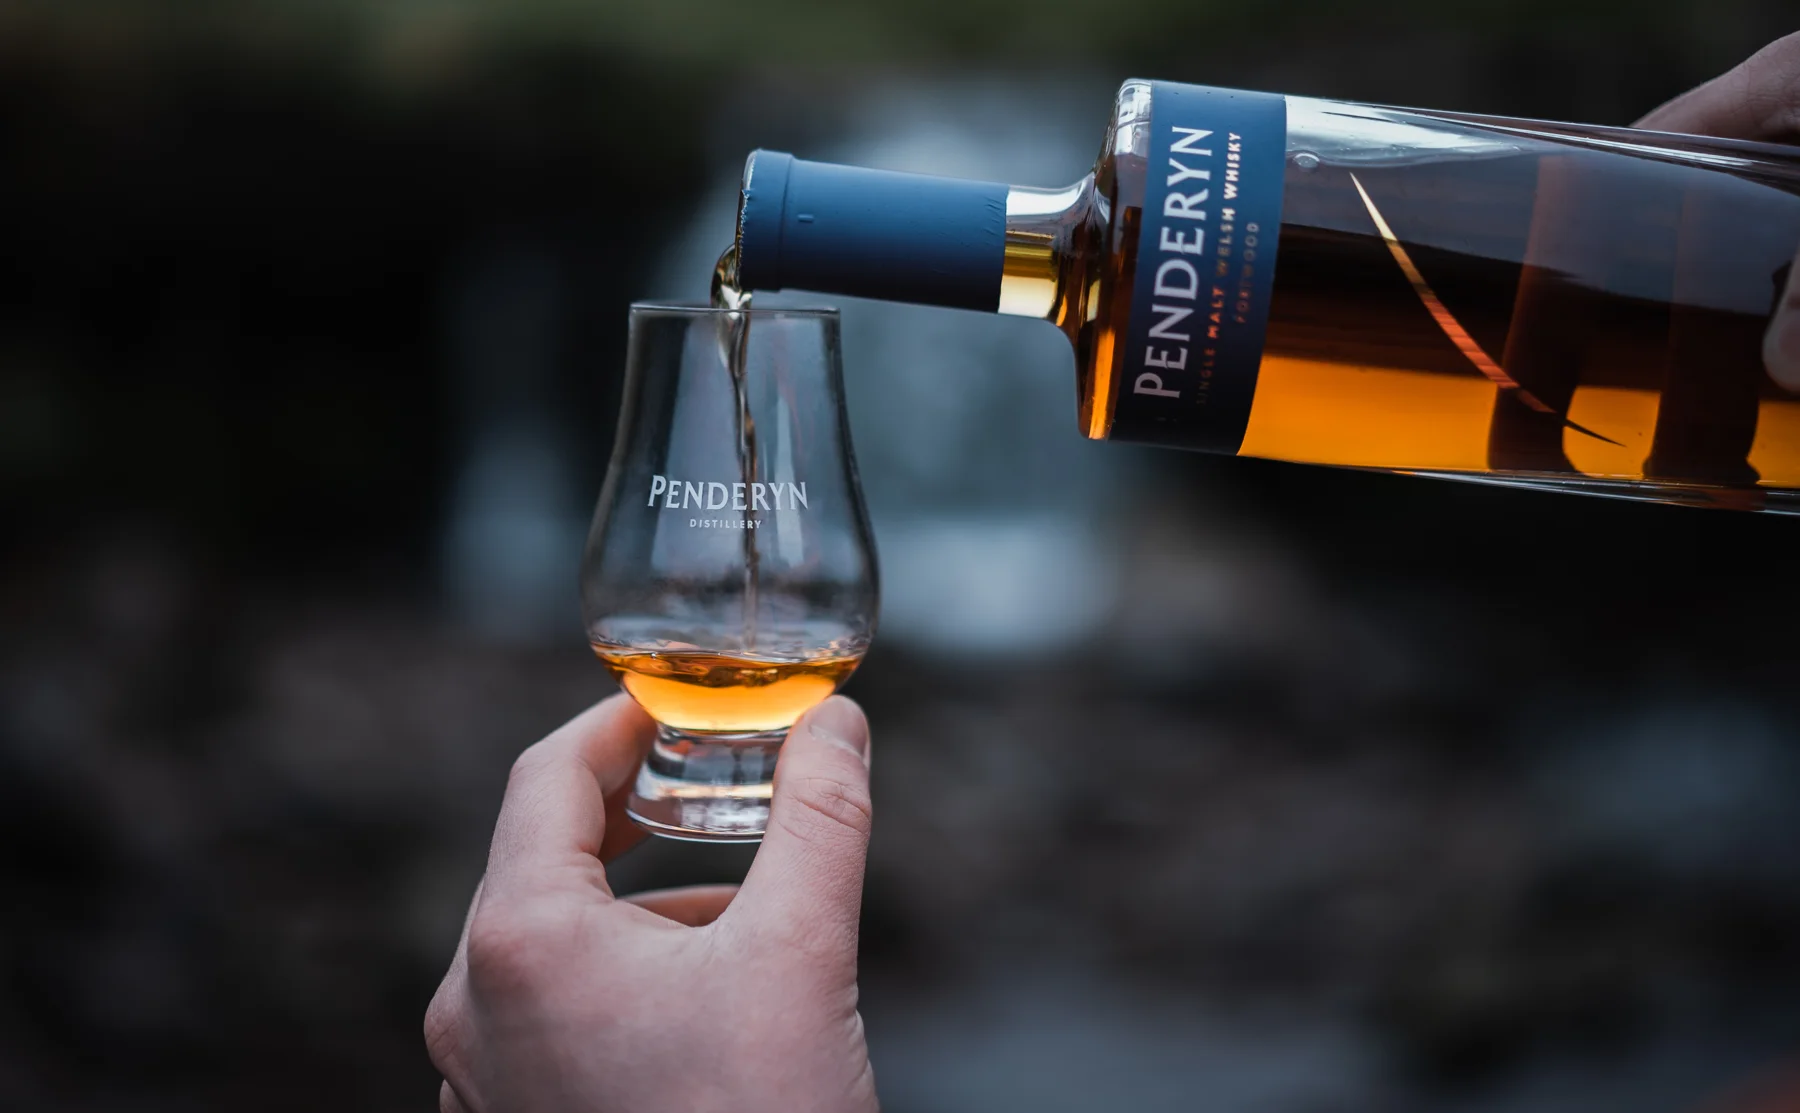 Welsh Whisky masterclass and food pairing experience - 1242221